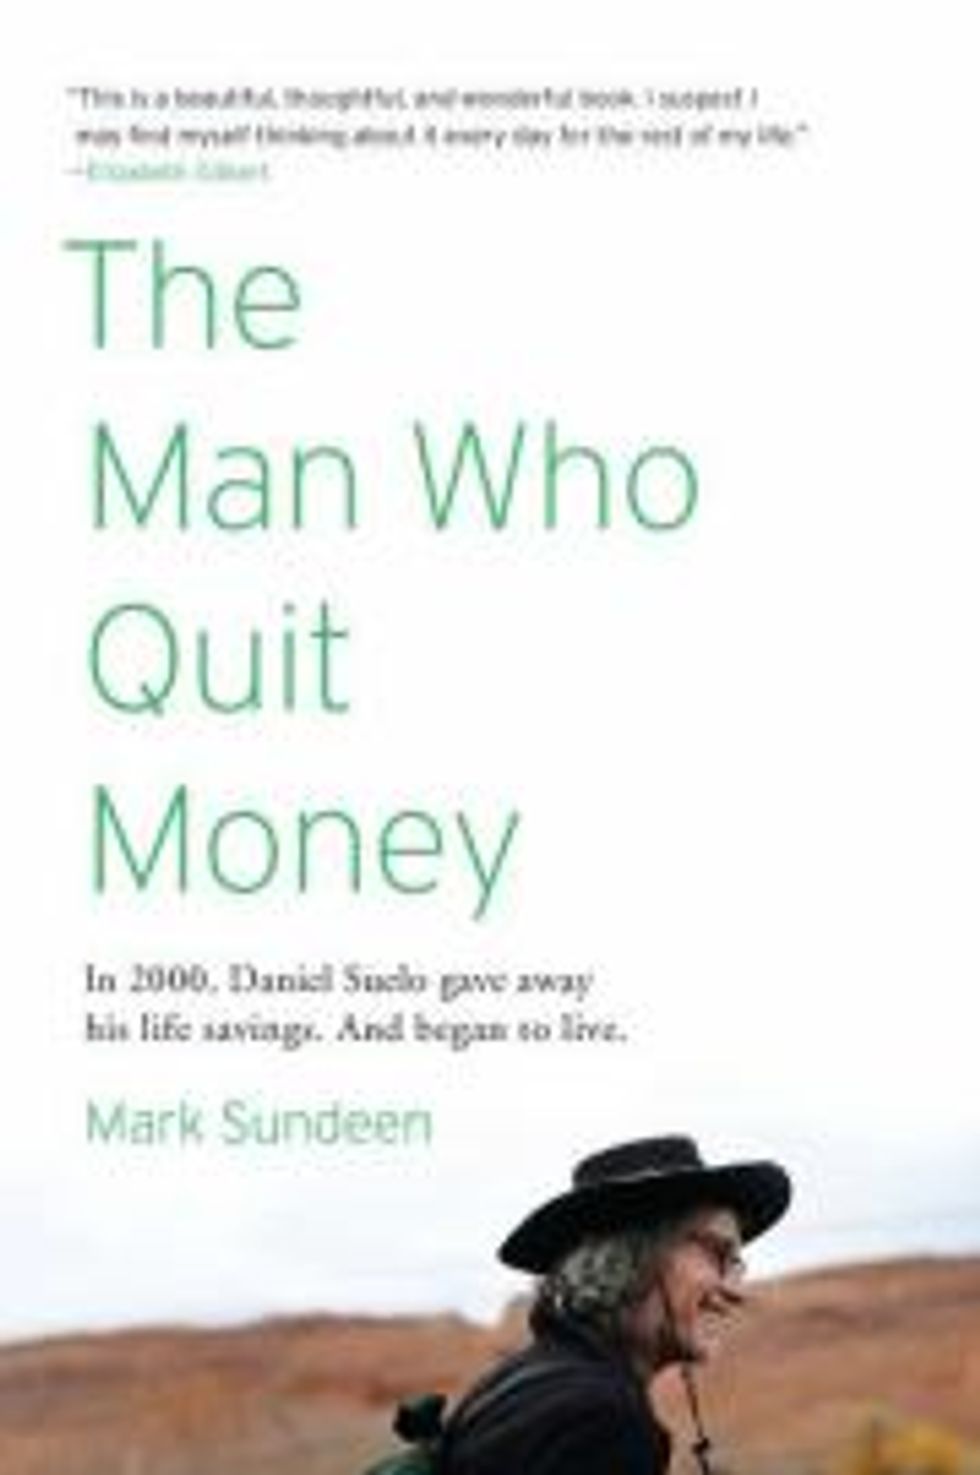 Will You 'Quit Money' On U.S. Tax Day, Like 'The Man Who Quit Money'?